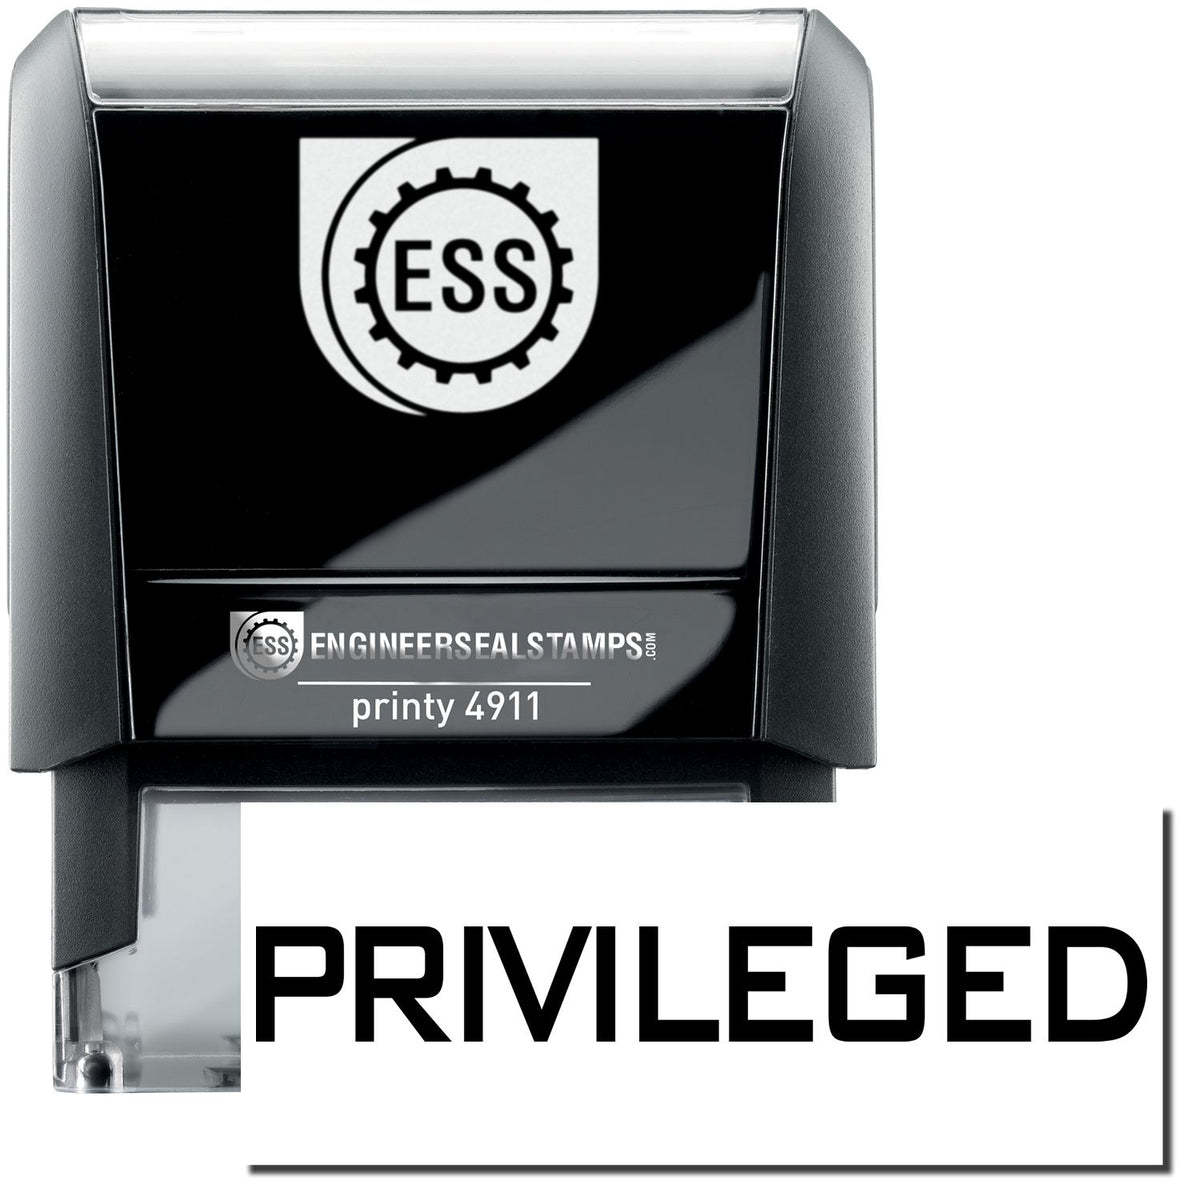 A self-inking stamp with a stamped image showing how the text &quot;PRIVILEGED&quot; is displayed after stamping.